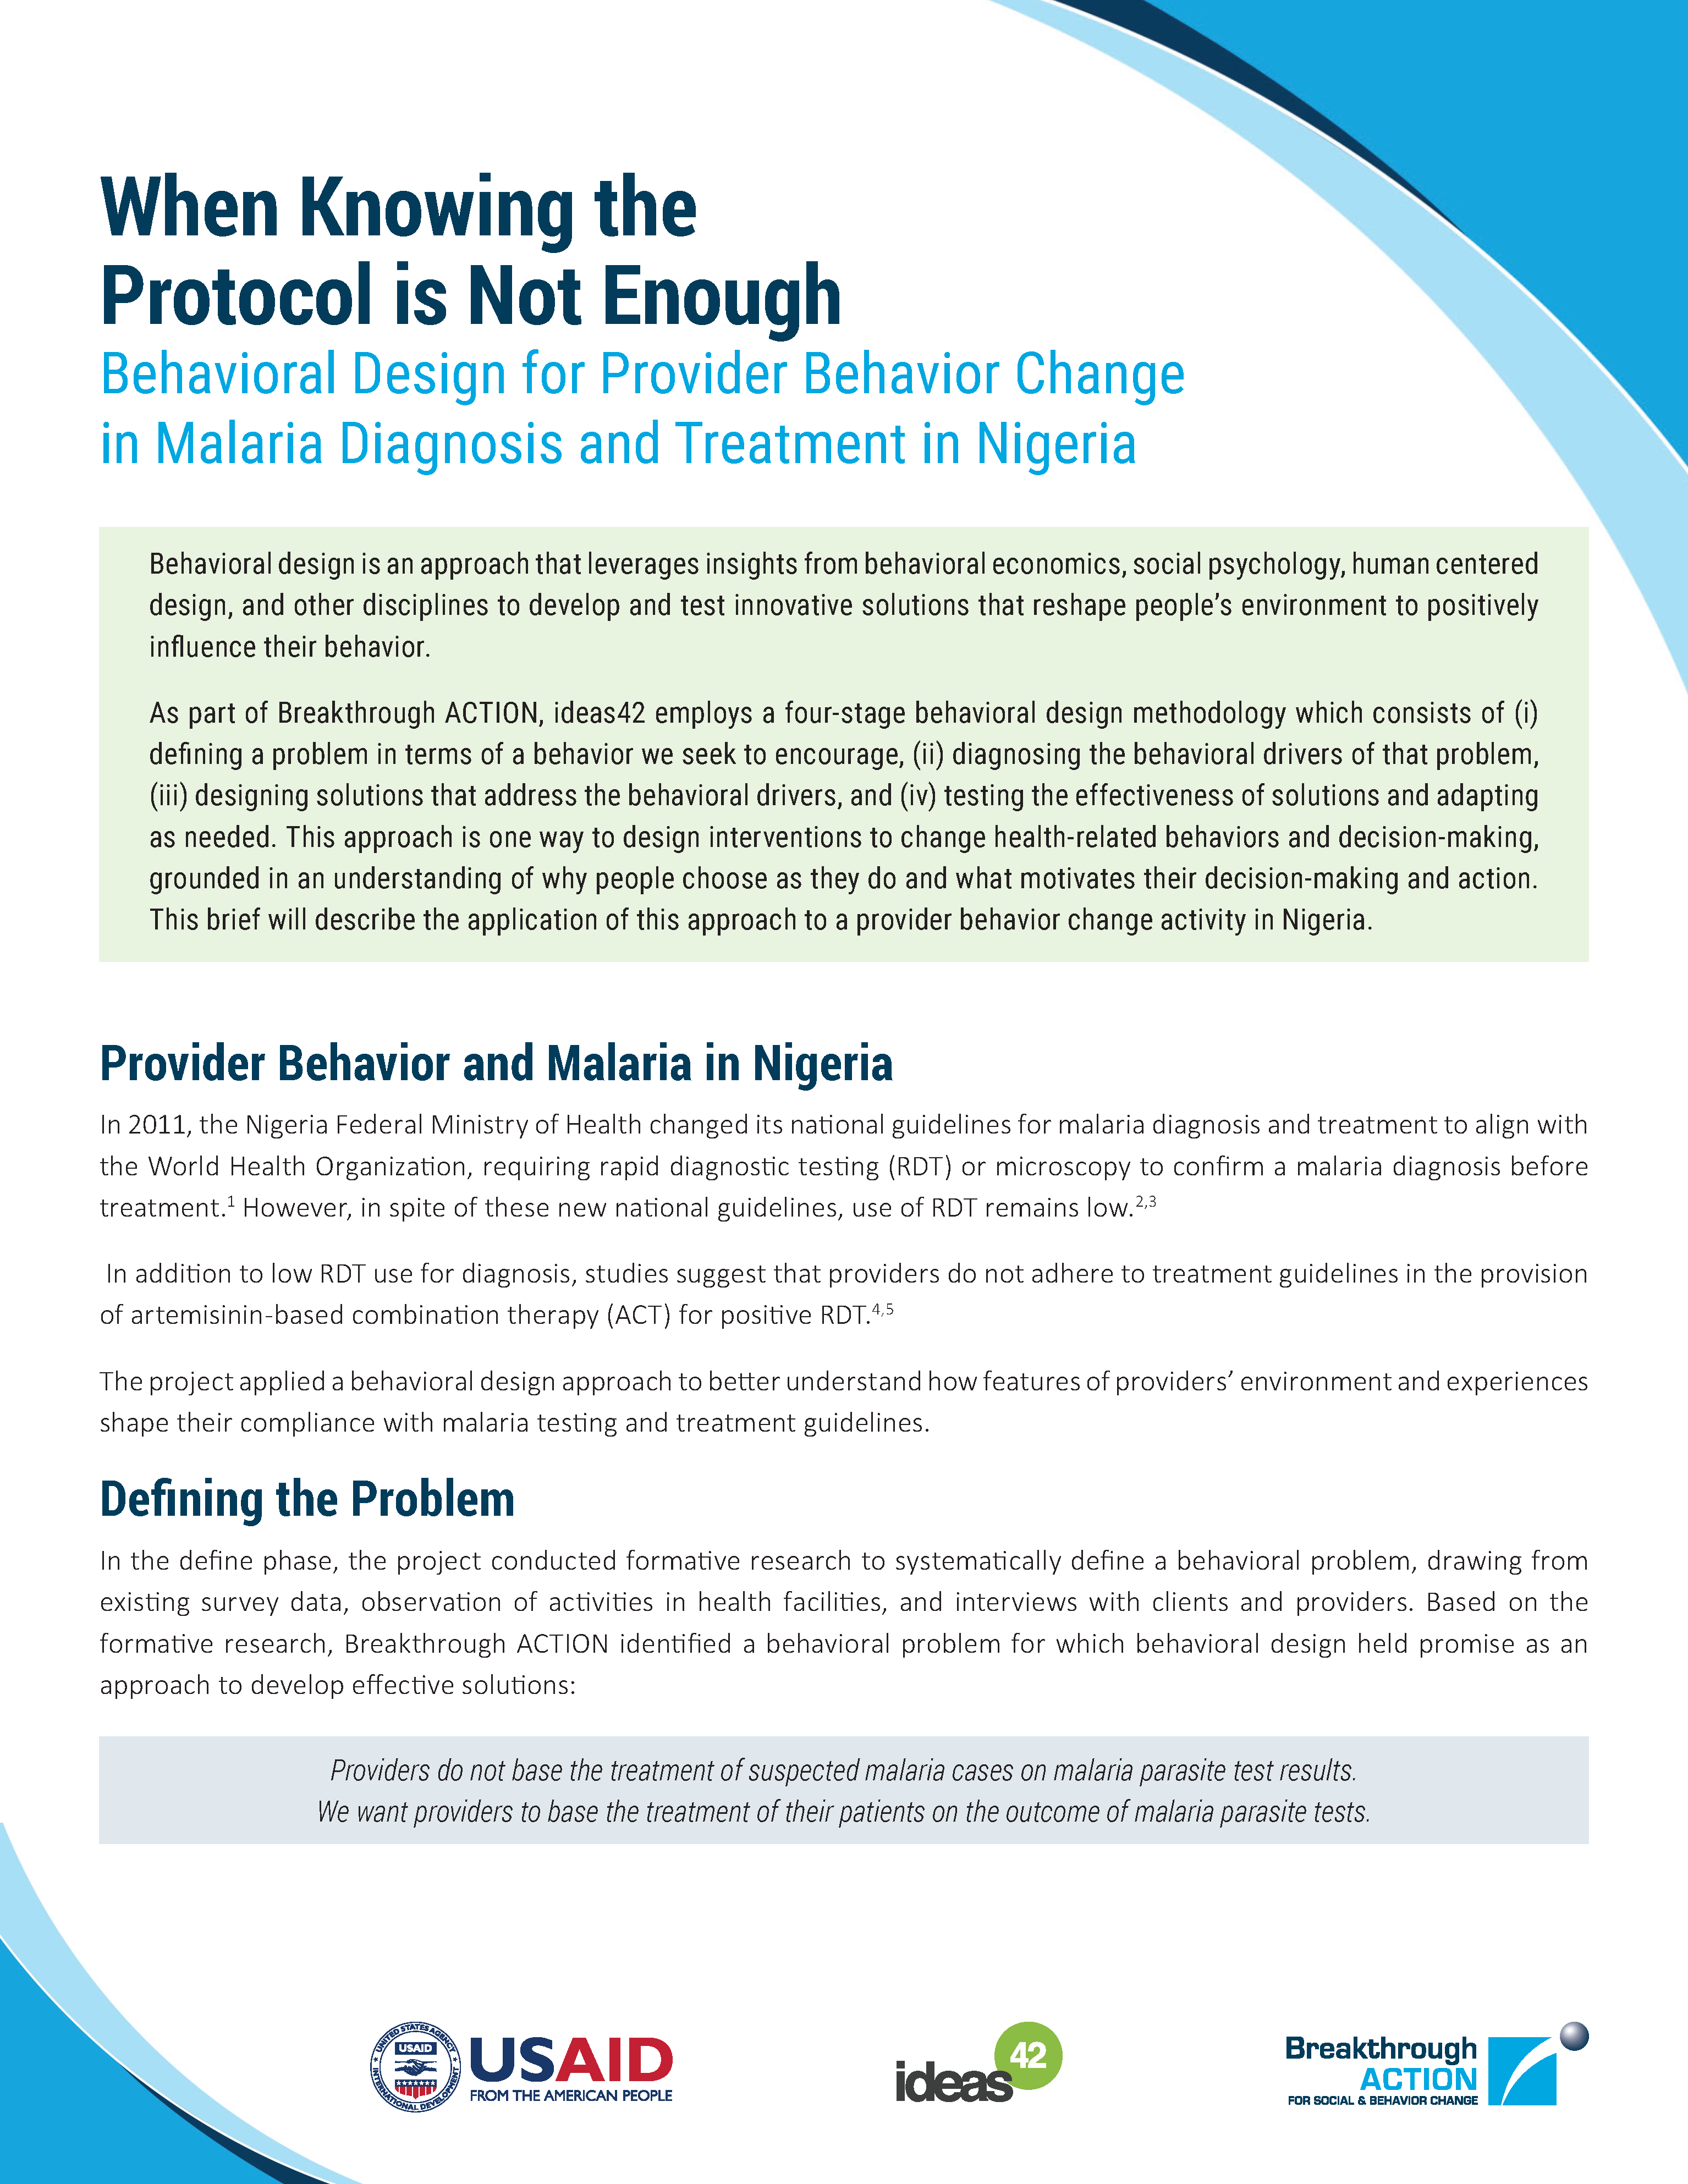 When Knowing the Protocol is Not Enough: Behavioral Design for PBC in  Malaria Diagnosis and Treatment in Nigeria - Breakthrough ACTION and  RESEARCH